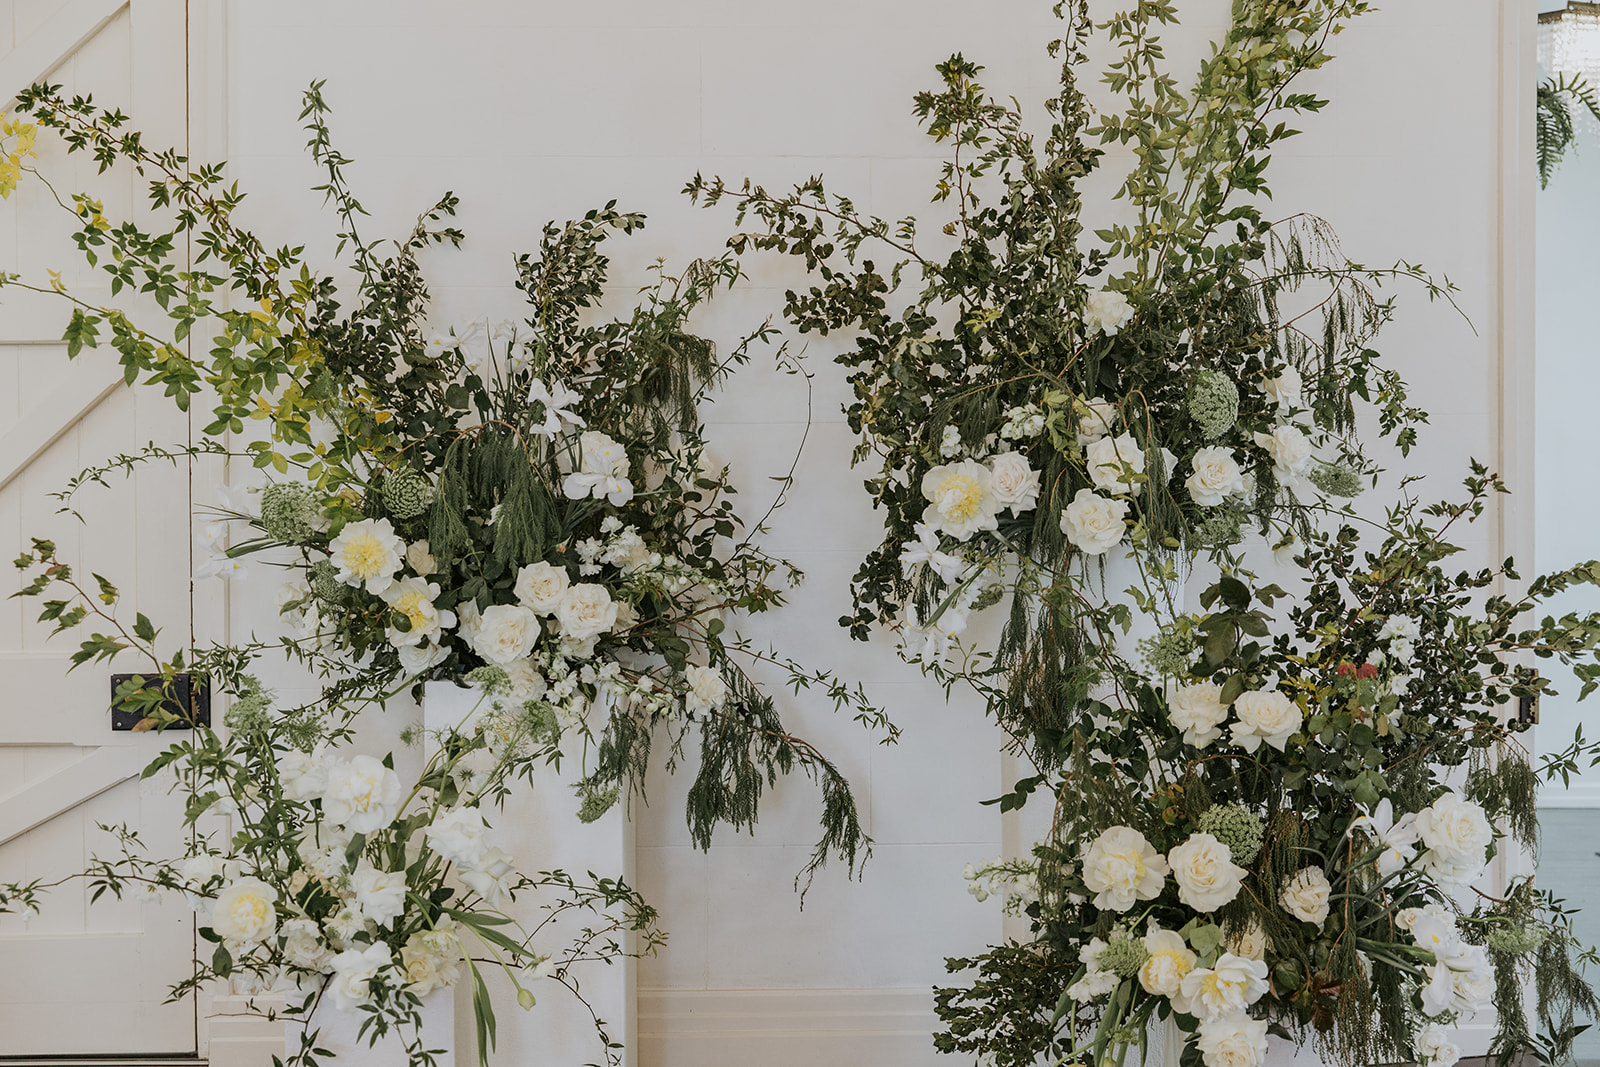 White wall in the background and green dried flowers everything and bright white flowers.